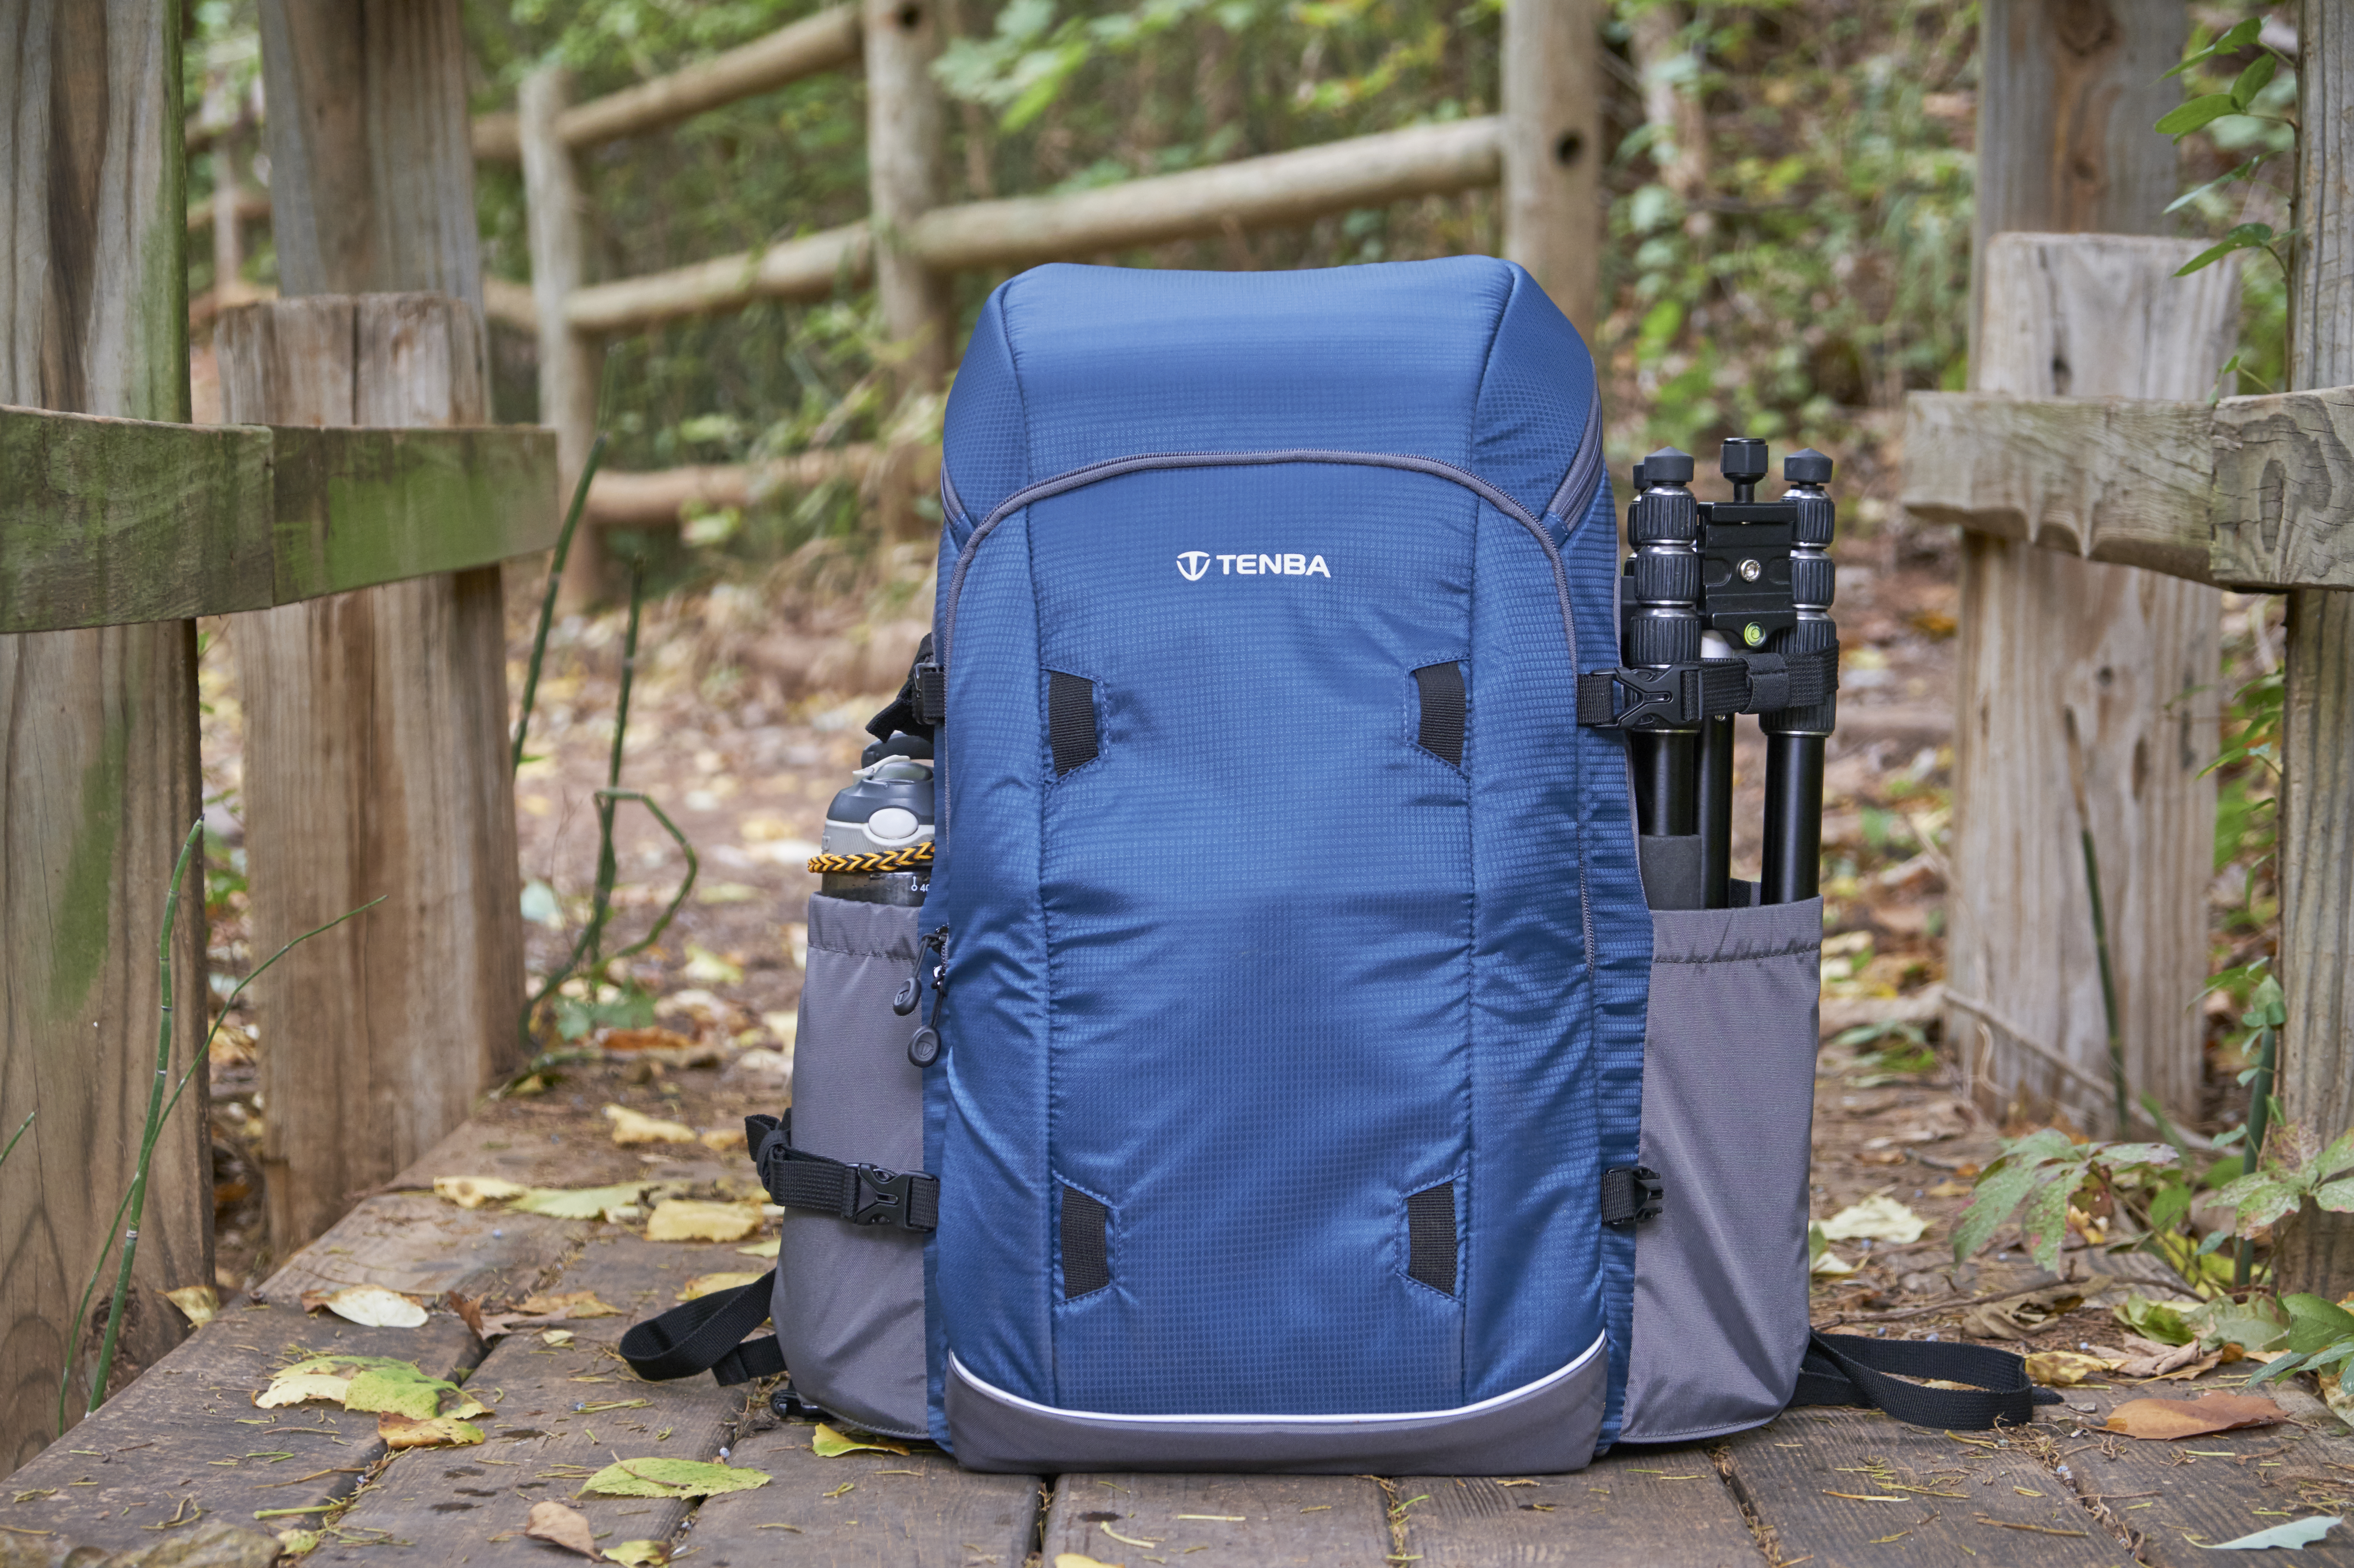 5 Spacious Camera Bags to Hit the Trails and Go Hiking with This Fall